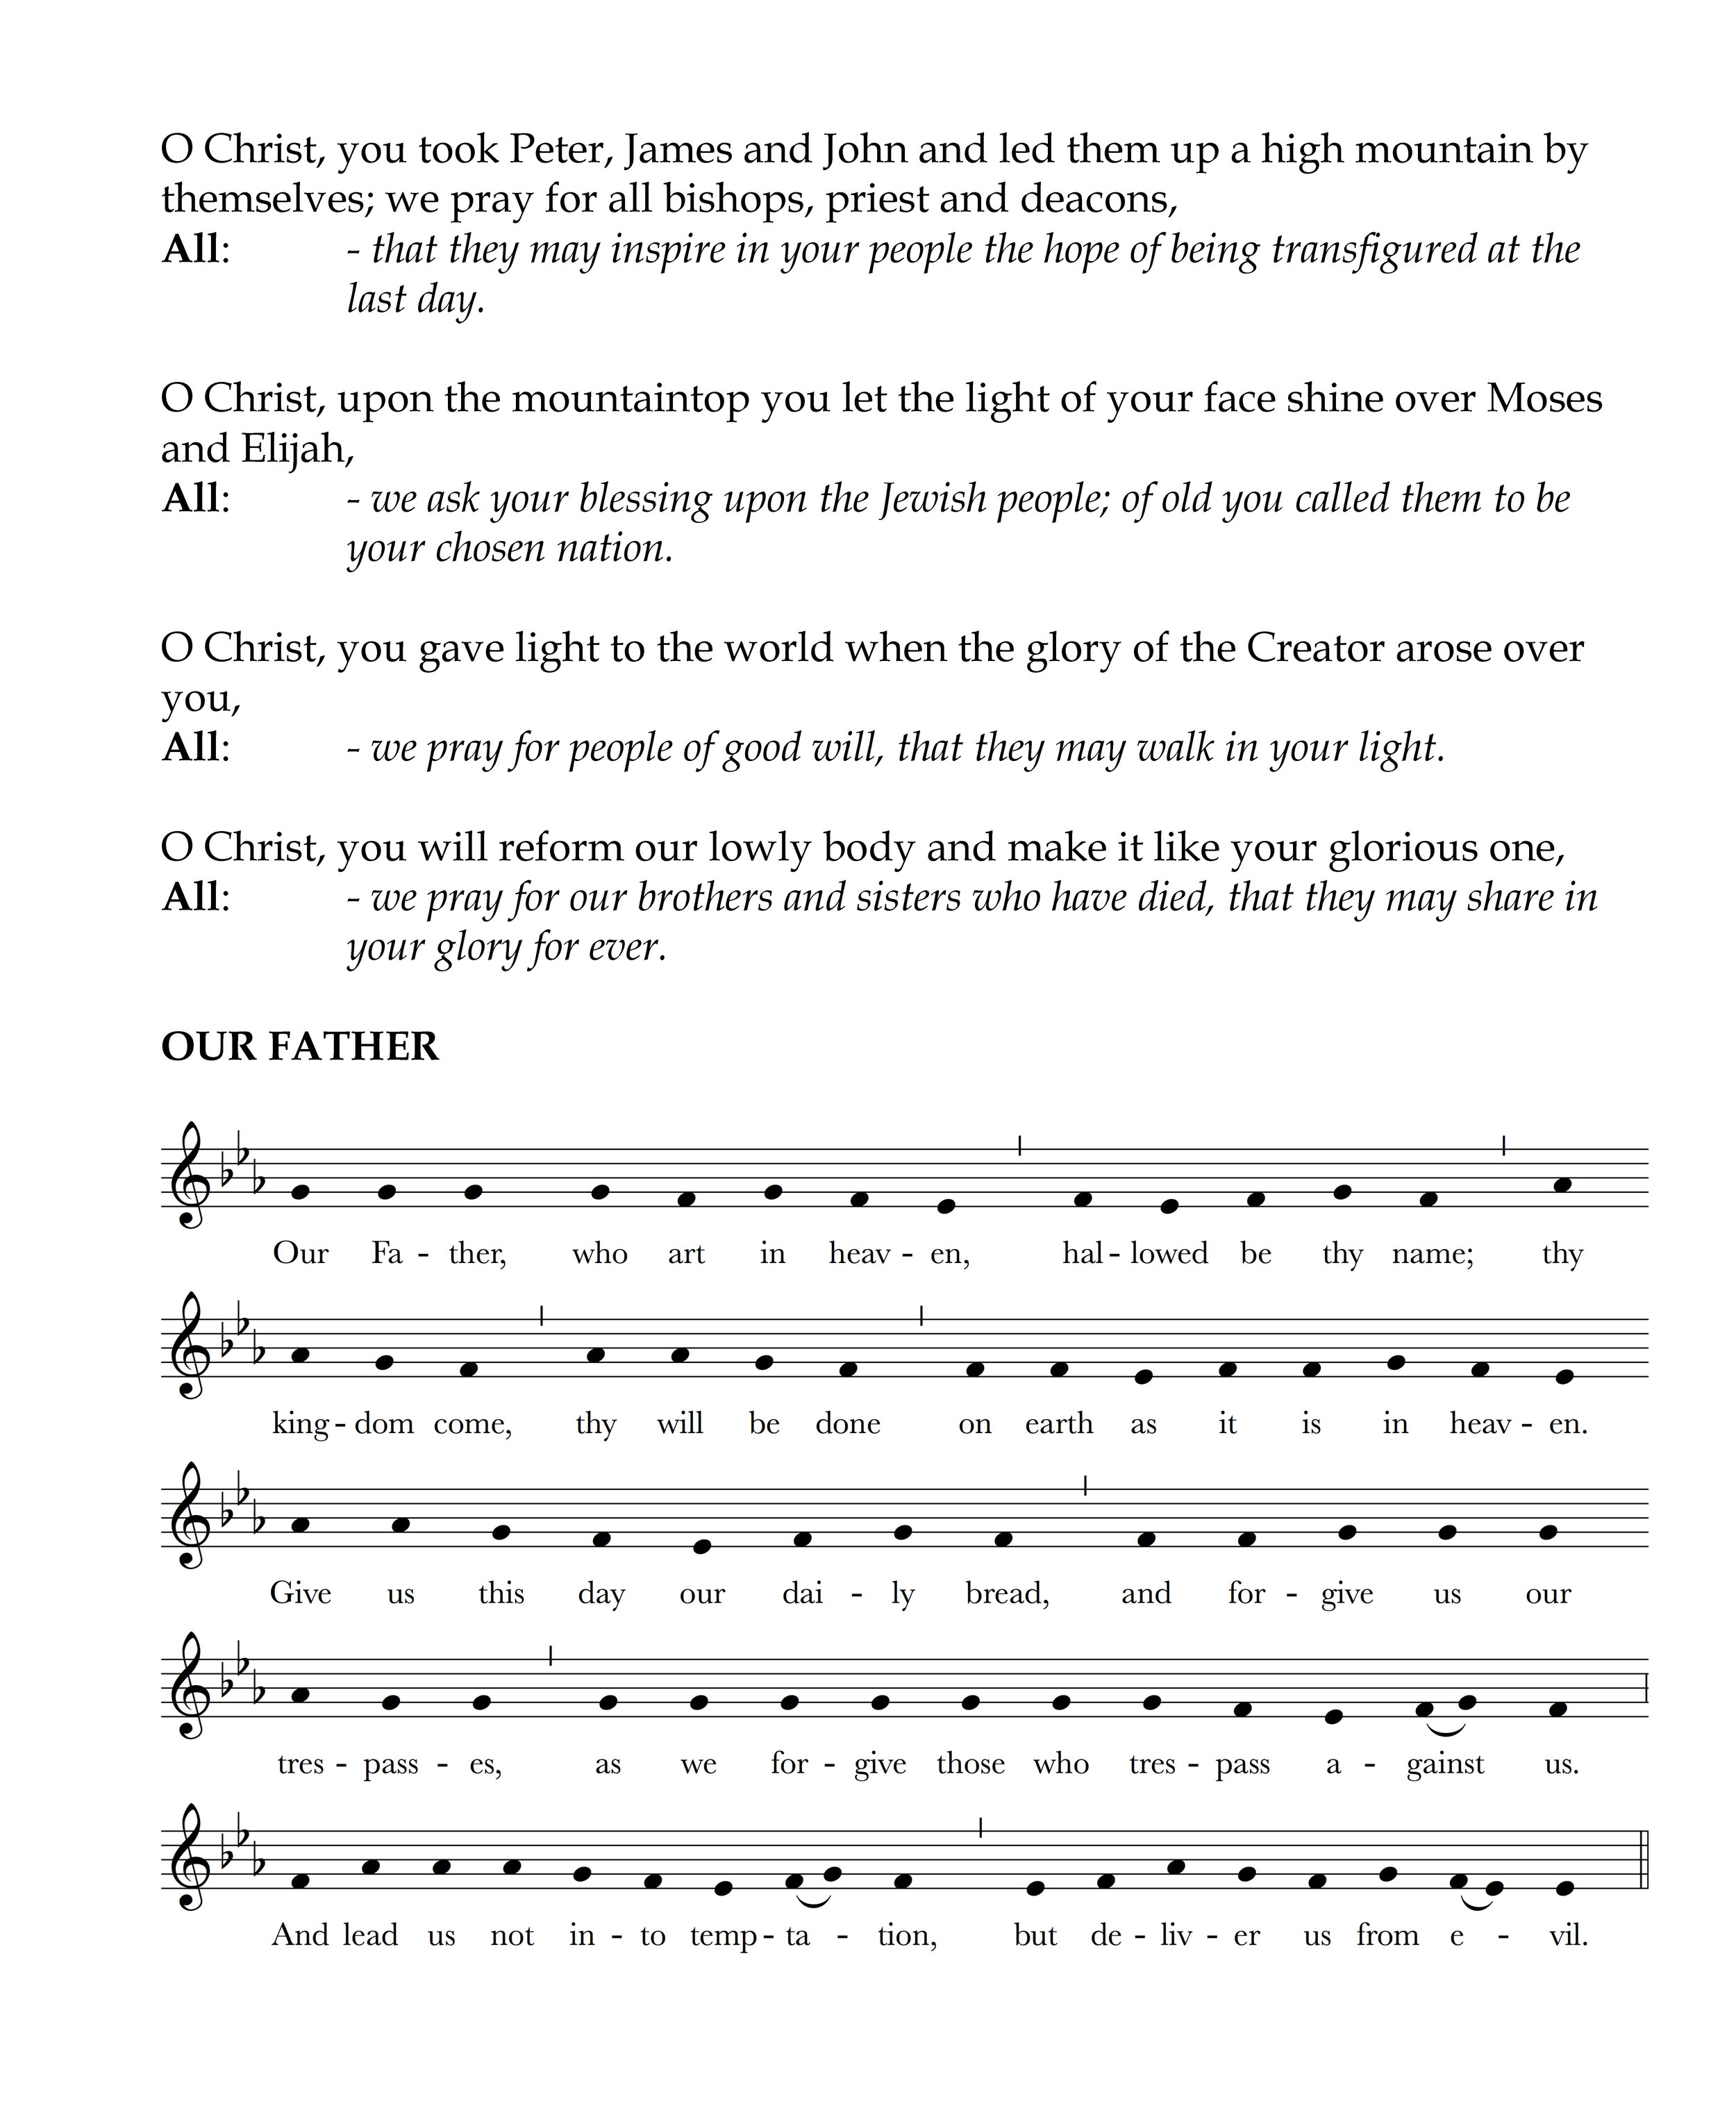 Transfiguration Vespers Program.pages in order_Page_13.jpg